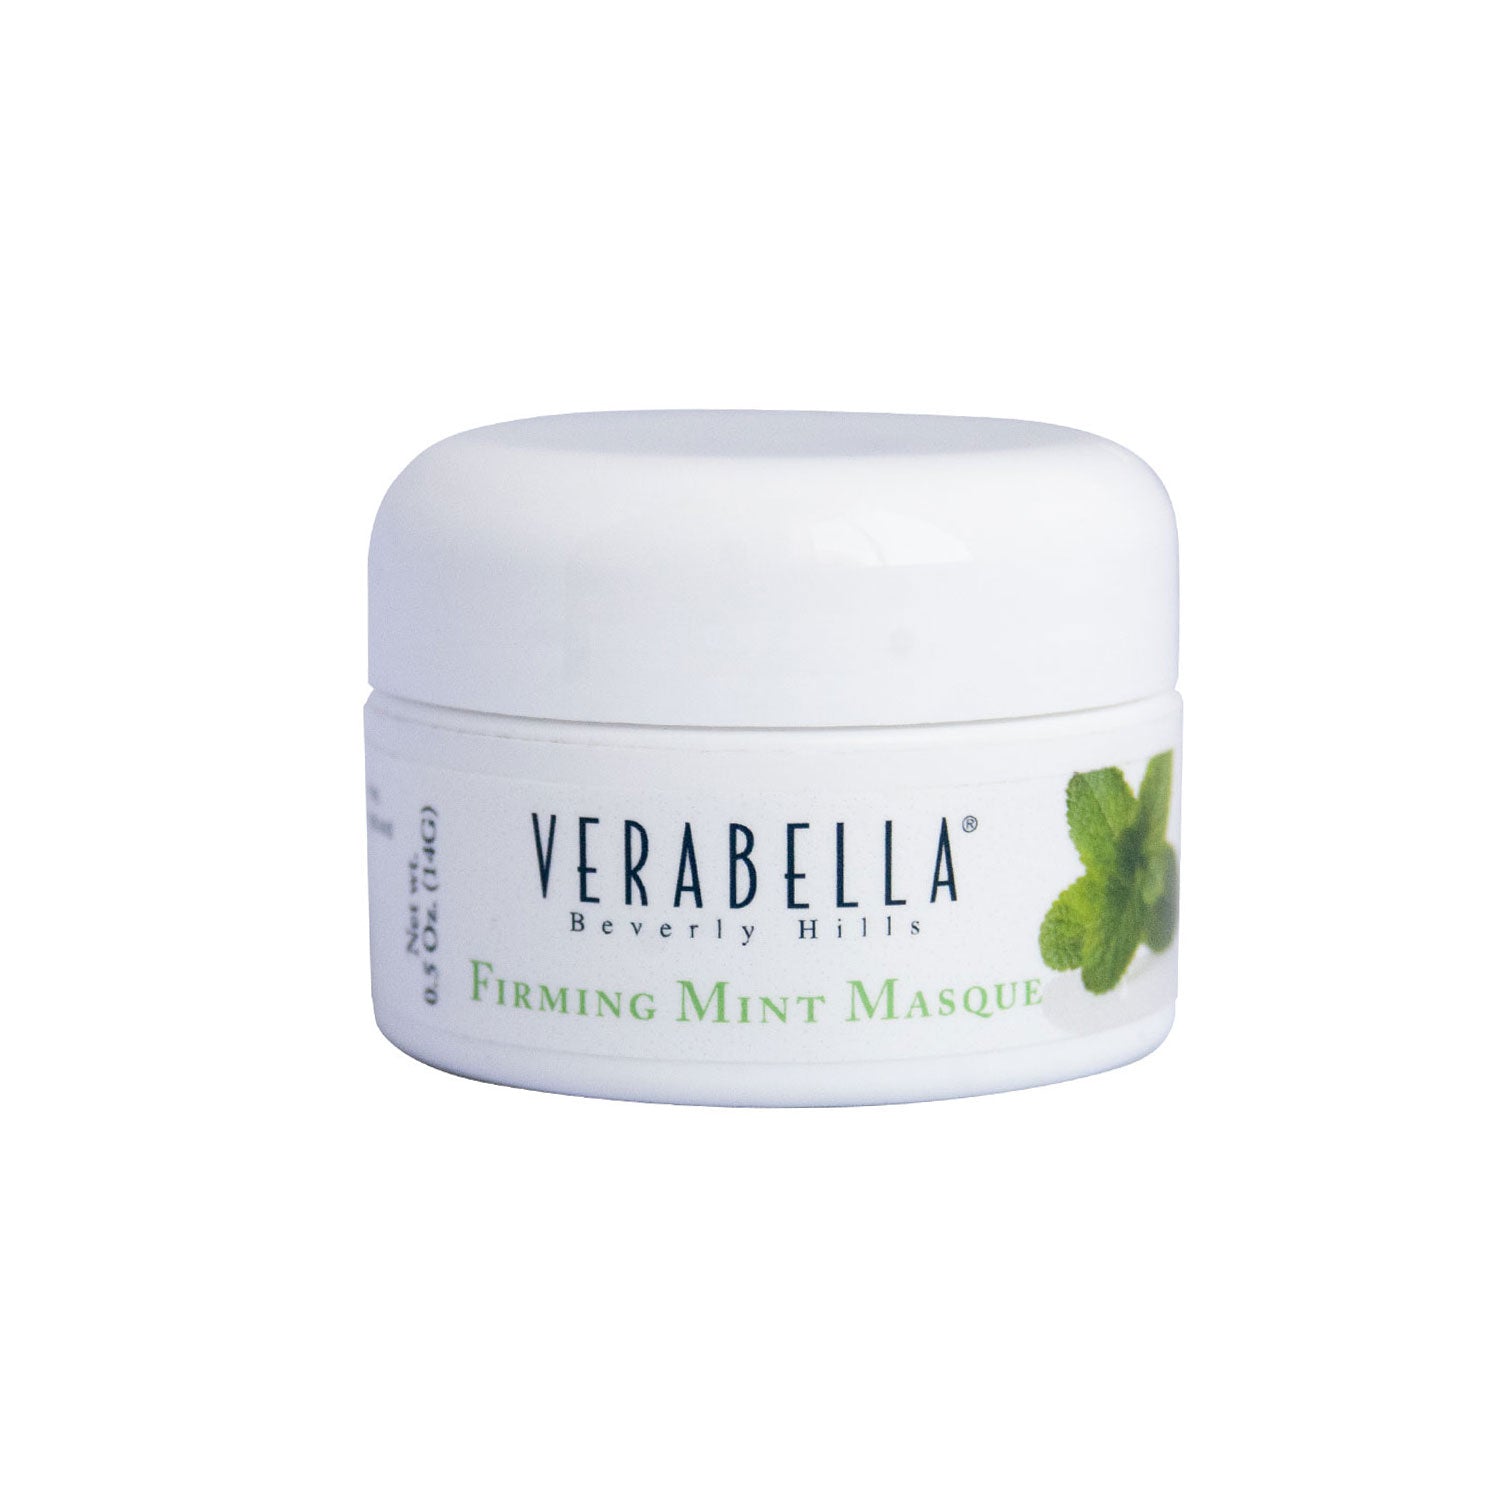 Verabella Travel Size Firming Mint Masque - product image